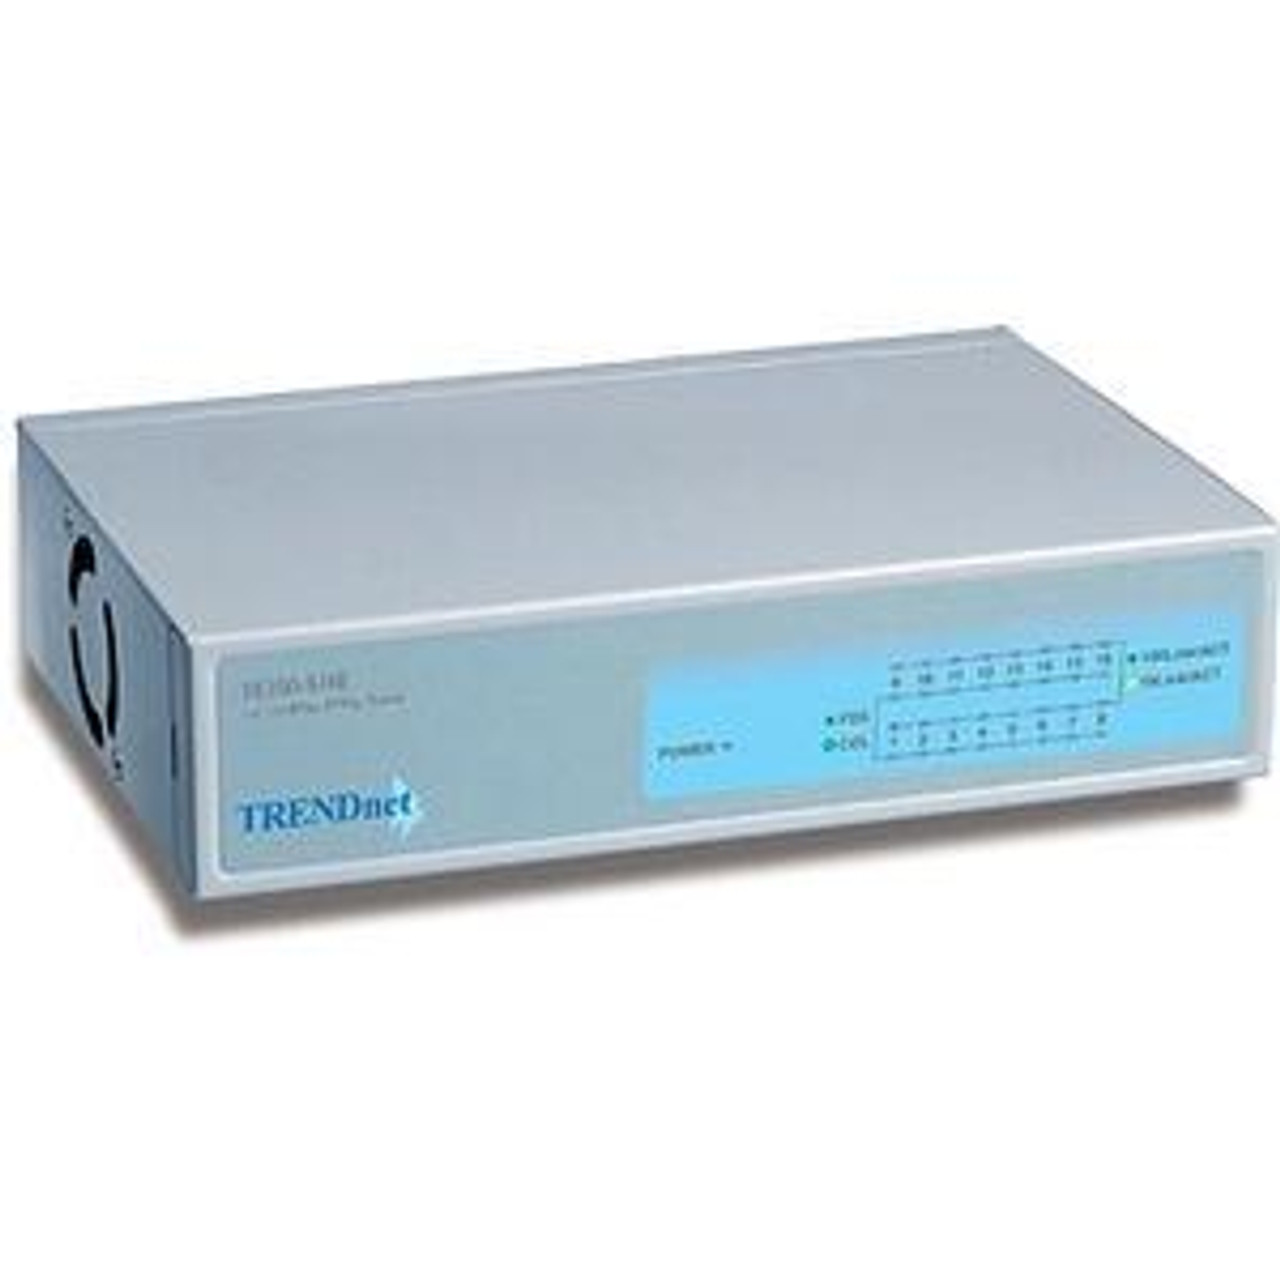 TE100-S16E TRENDnet TE100 S16E+ 16-Ports 10/100MB/s Fast Ethernet 100MB/s Switch (Refurbished)